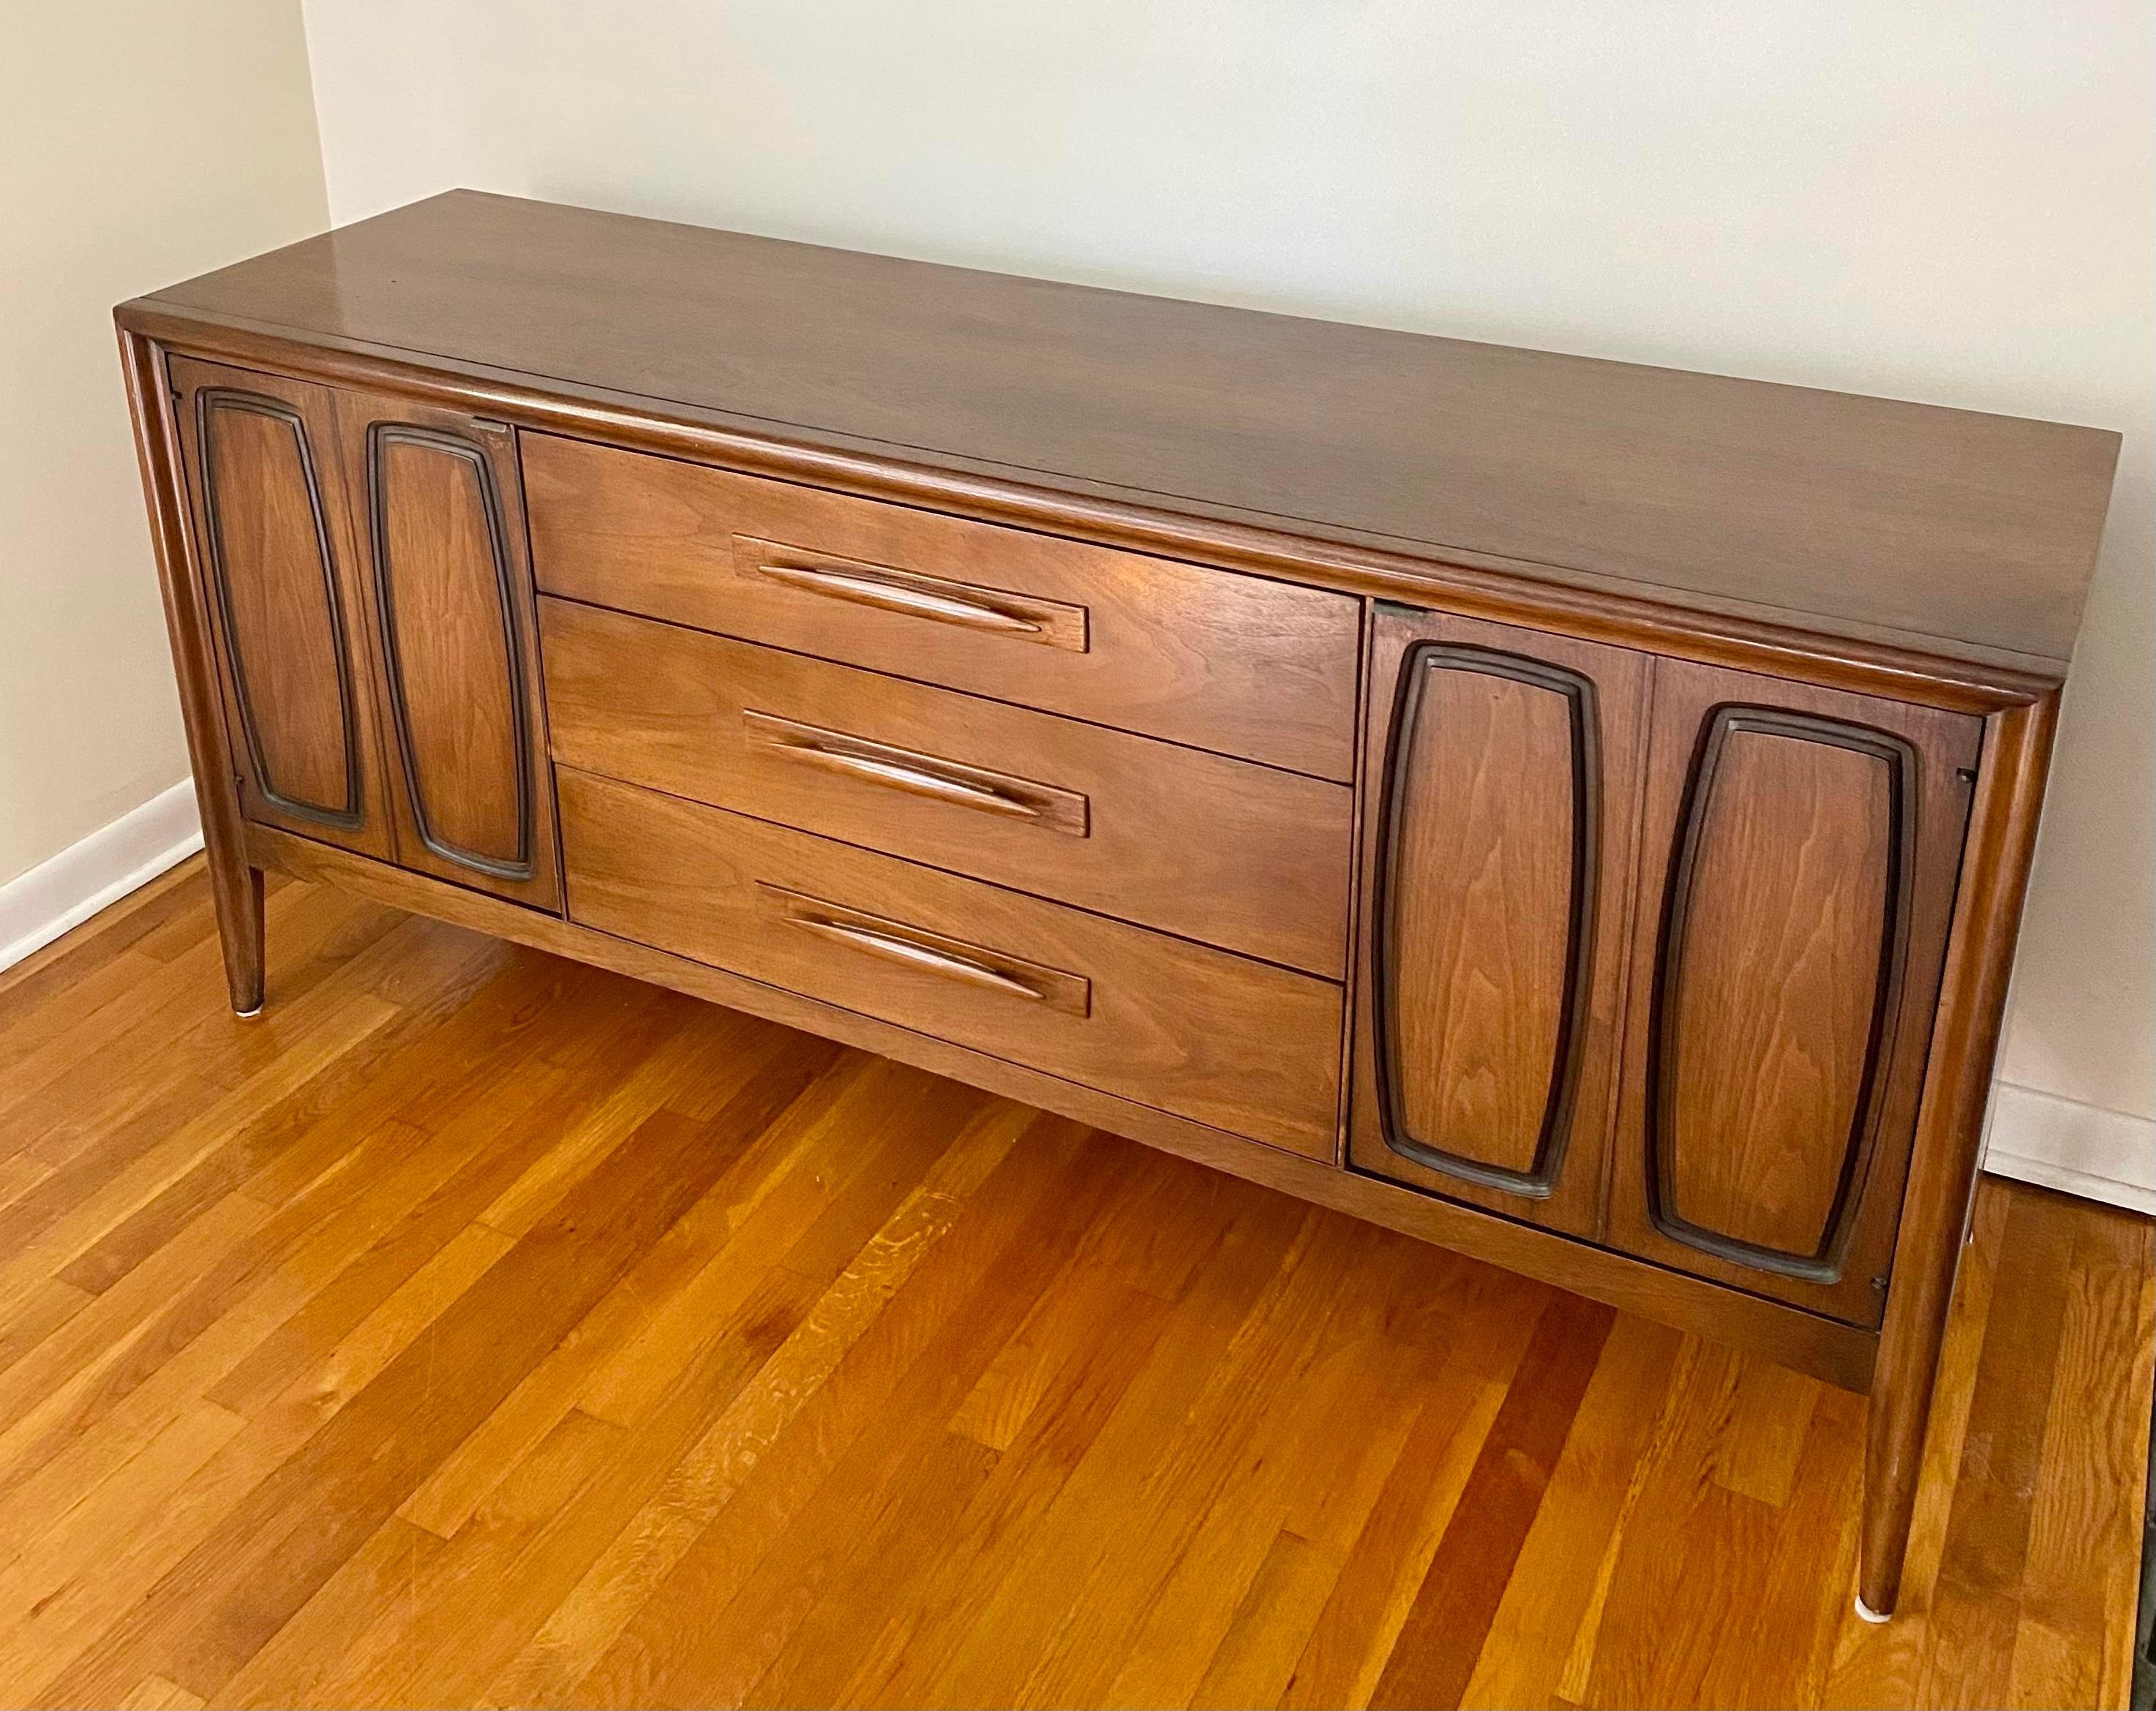 Mid-Century Modern Broyhill Emphasis Walnut Credenza features 3 pull drawers in the middle and 2 carved wooden doors on the sides.

Made by Broyhill Furniture, USA 1970s